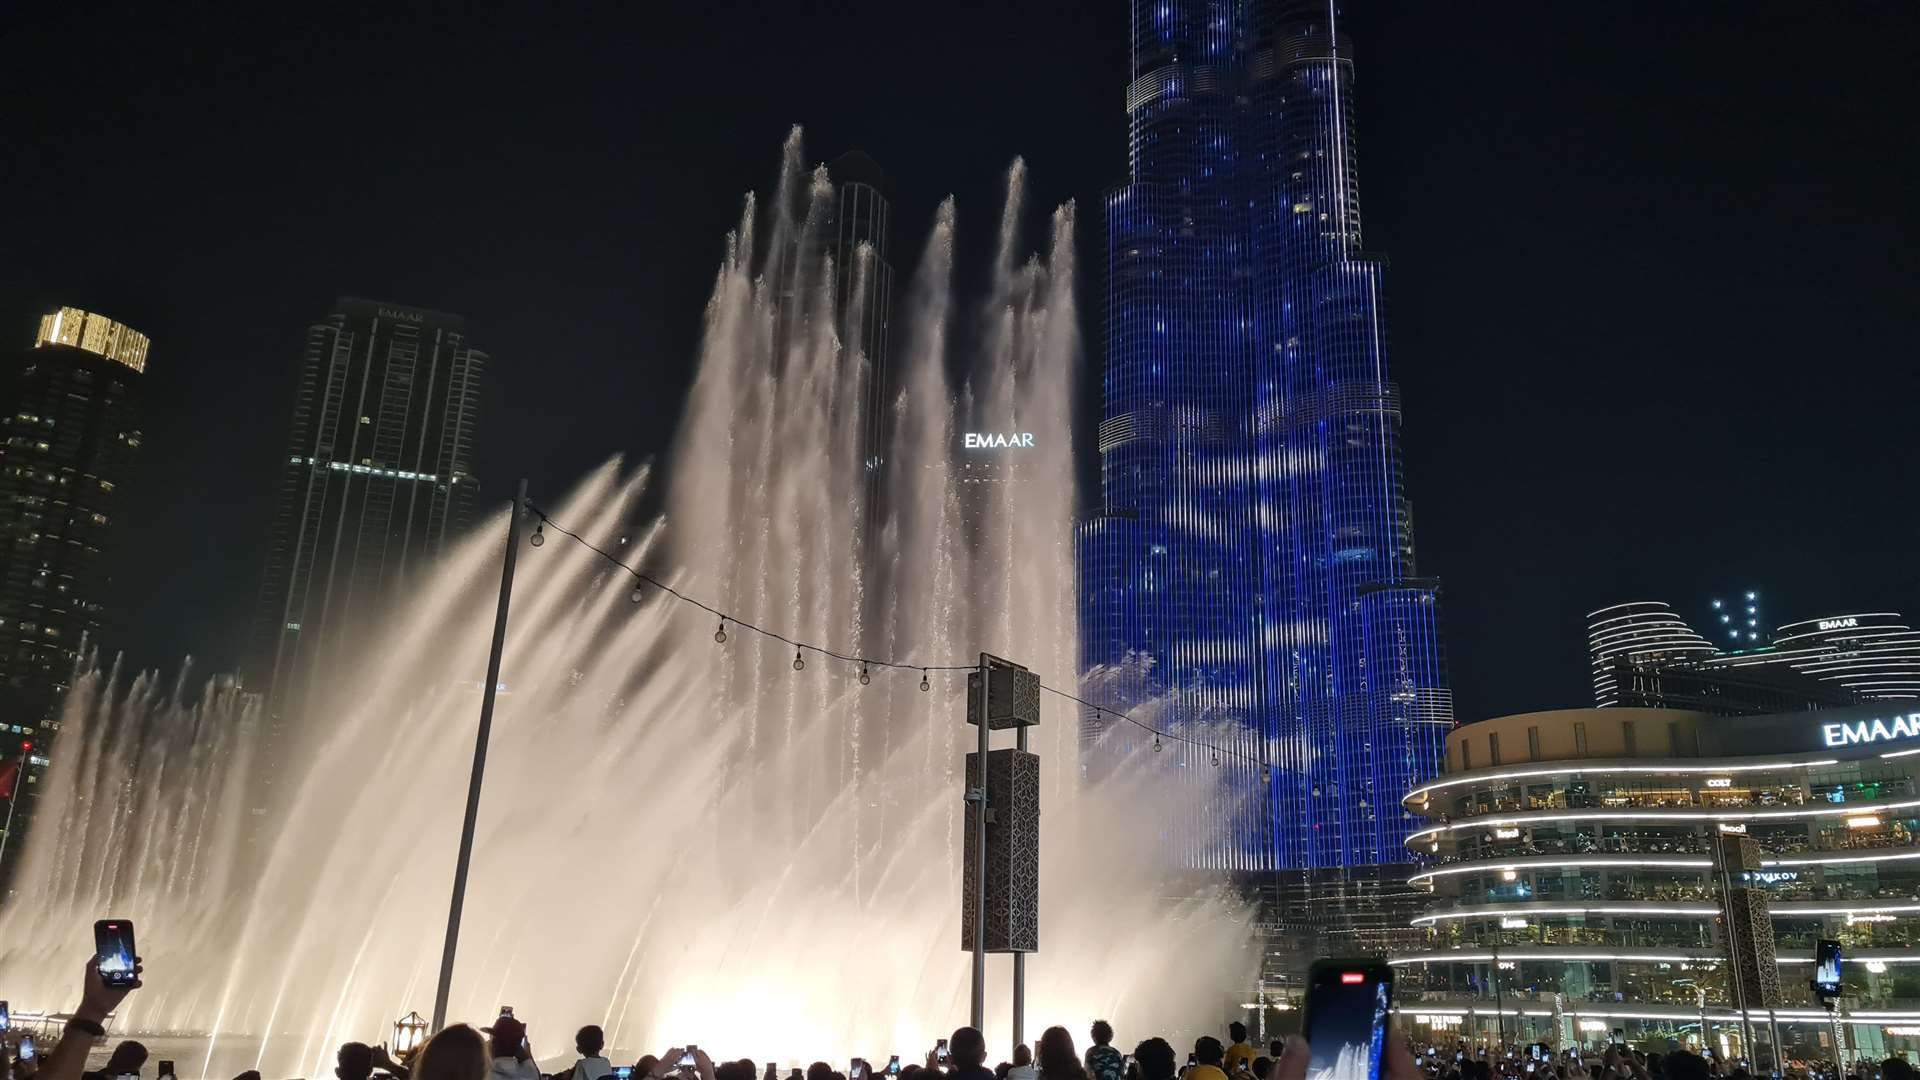 The spectacular fountain show in front of the Burj Khalifa - the world's tallest building